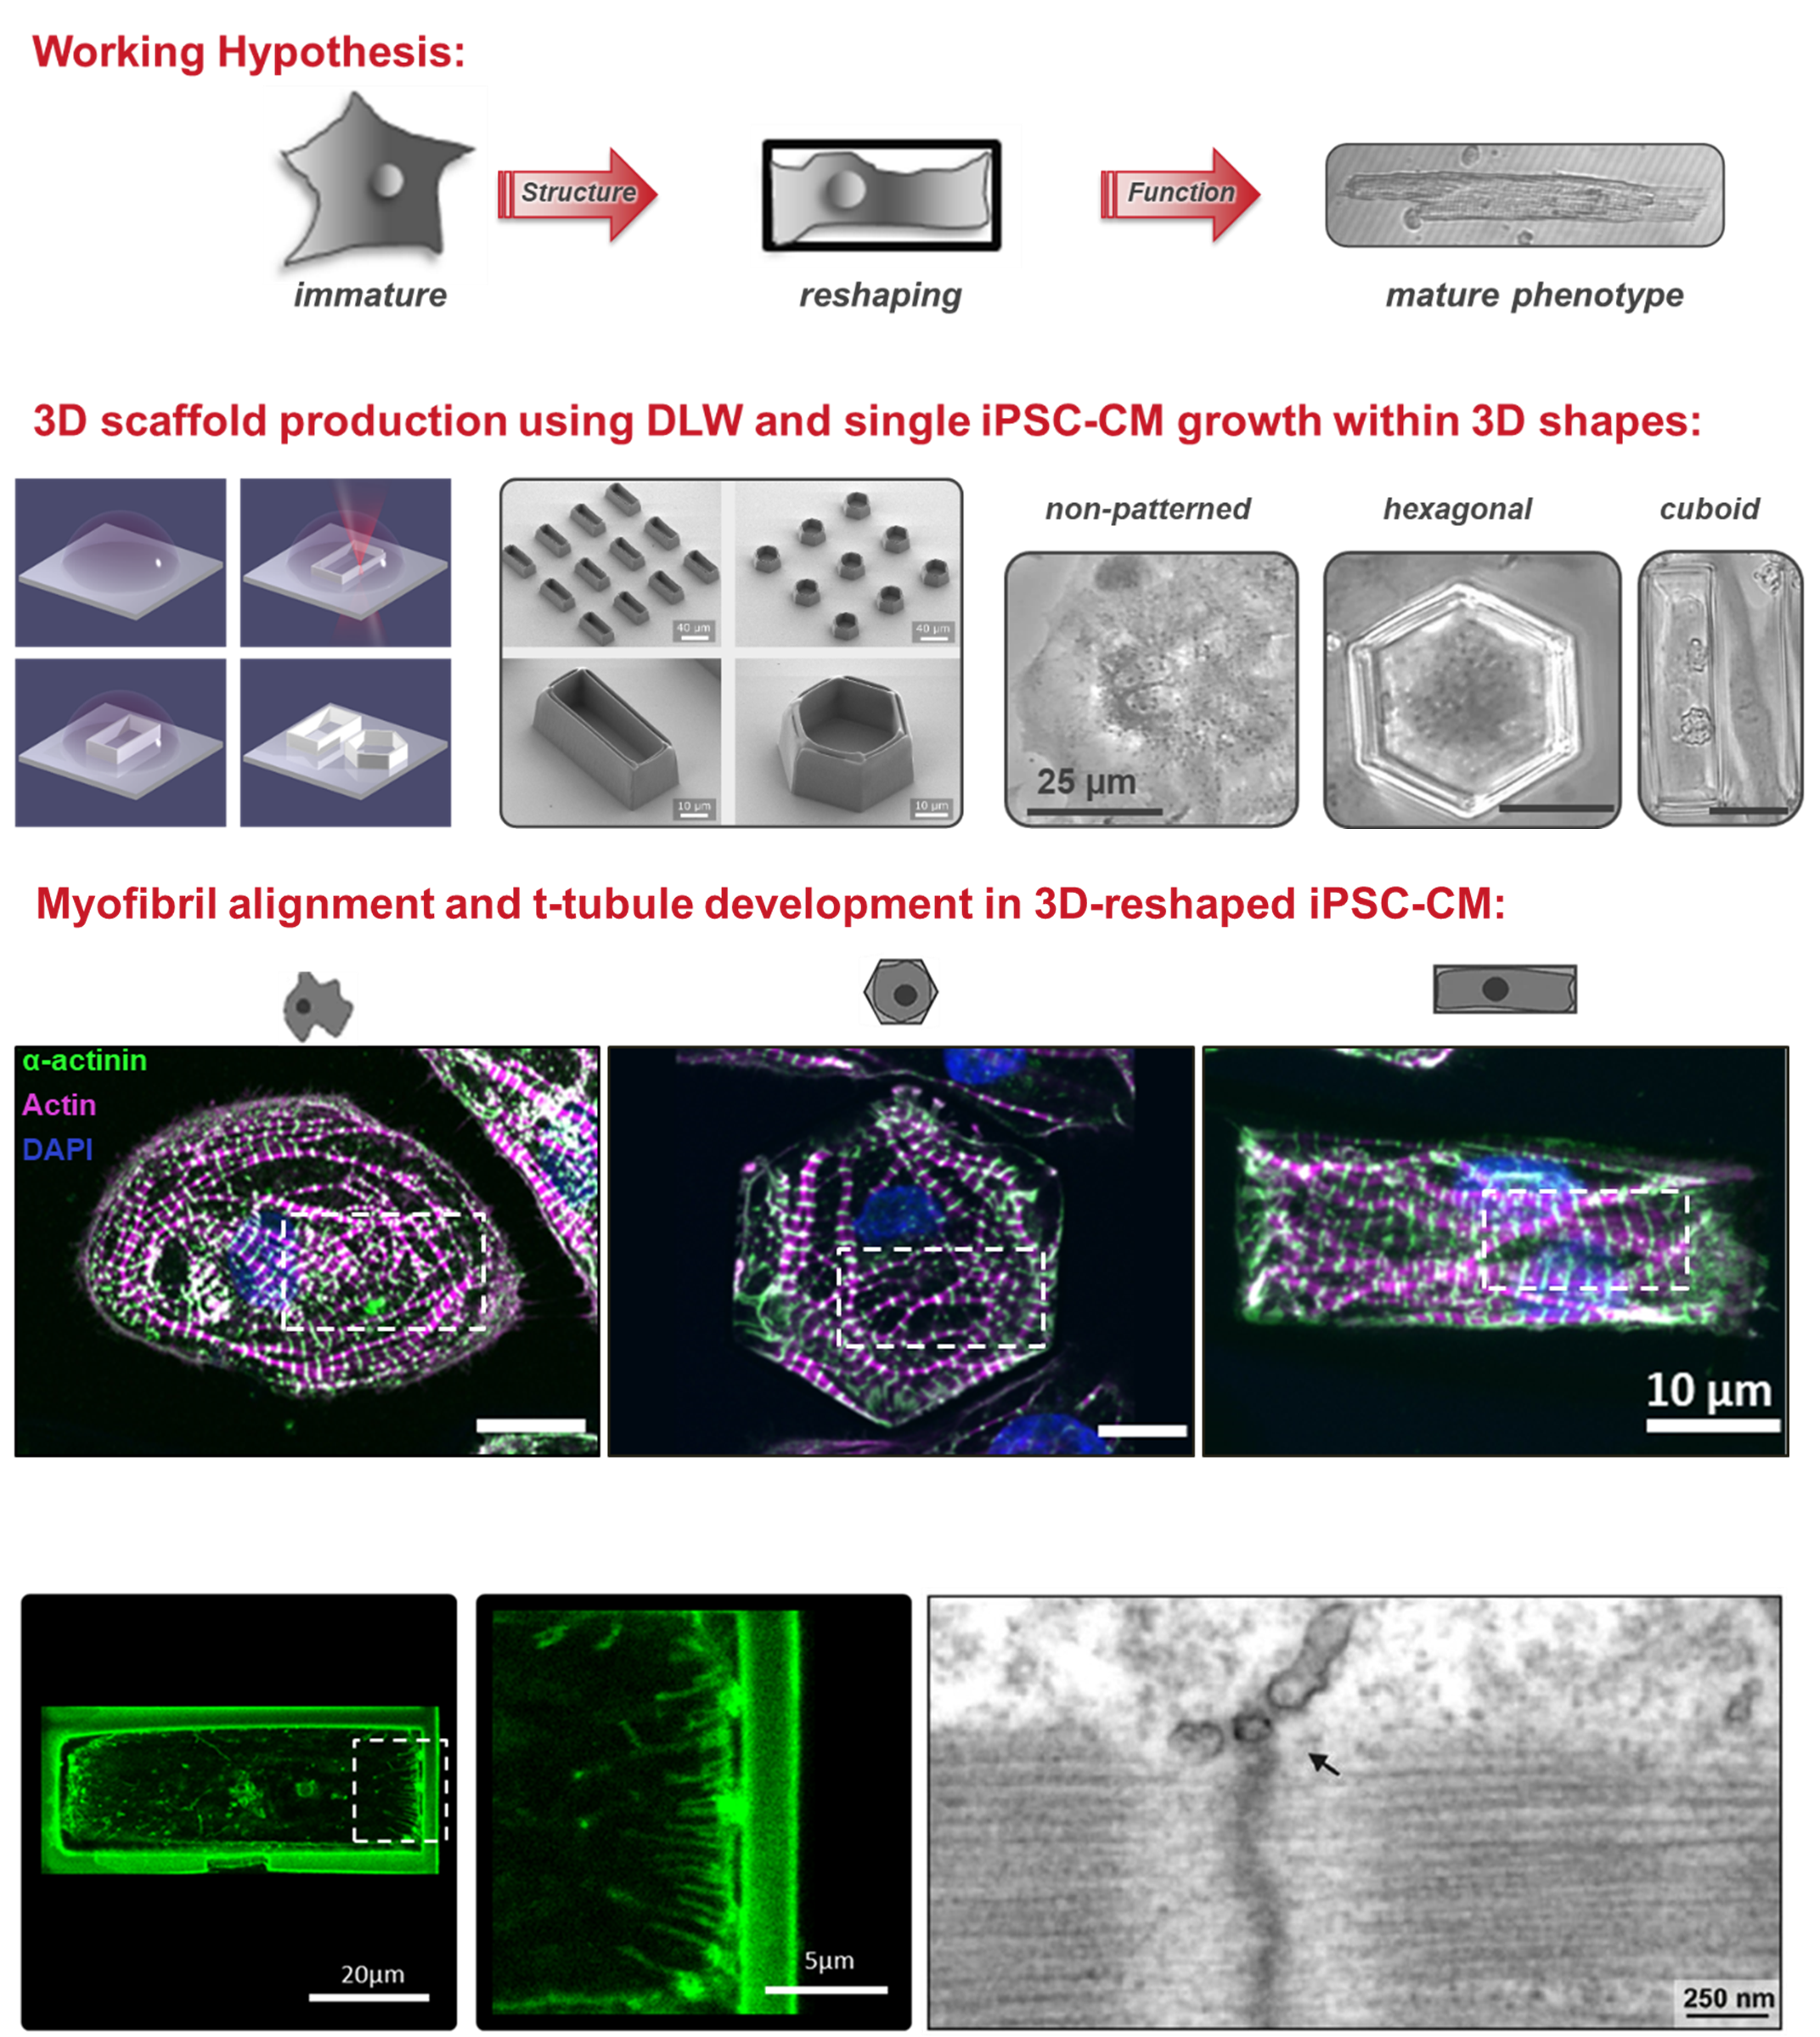 different geometries induce structural remodeling in hiPSC-cardiomyocytes